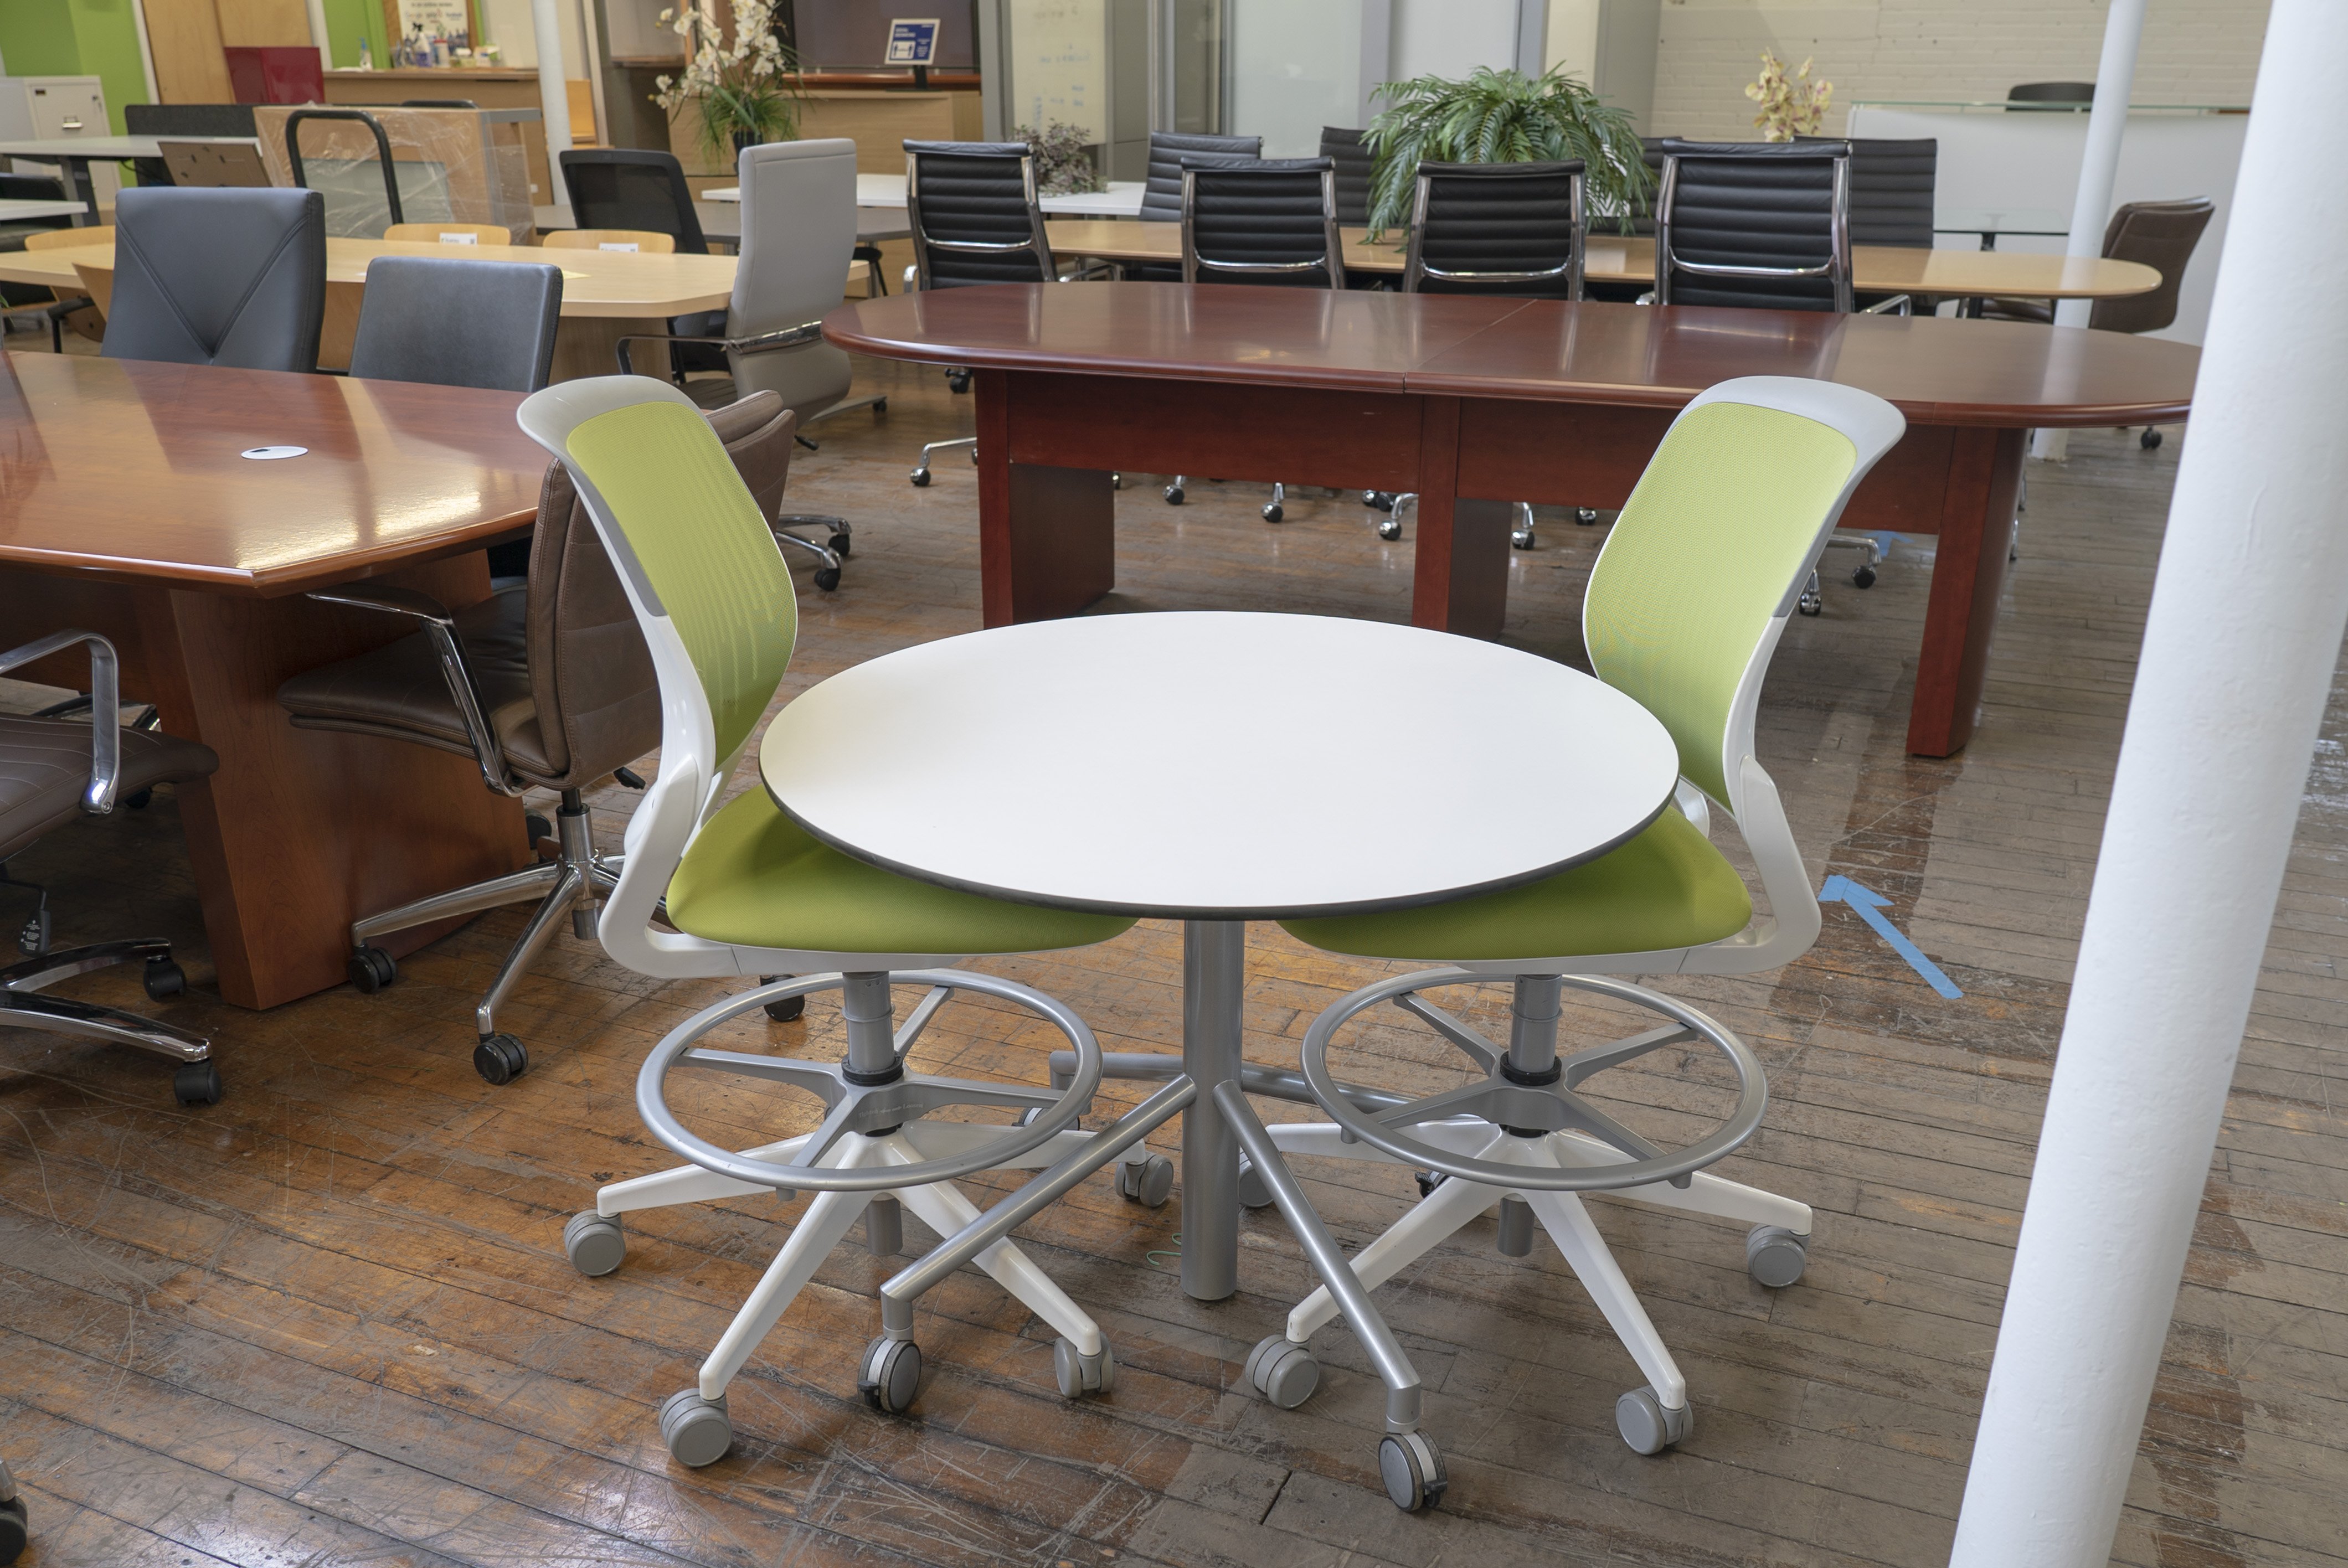 36-pneumatic-height-adjustable-mobile-round-table